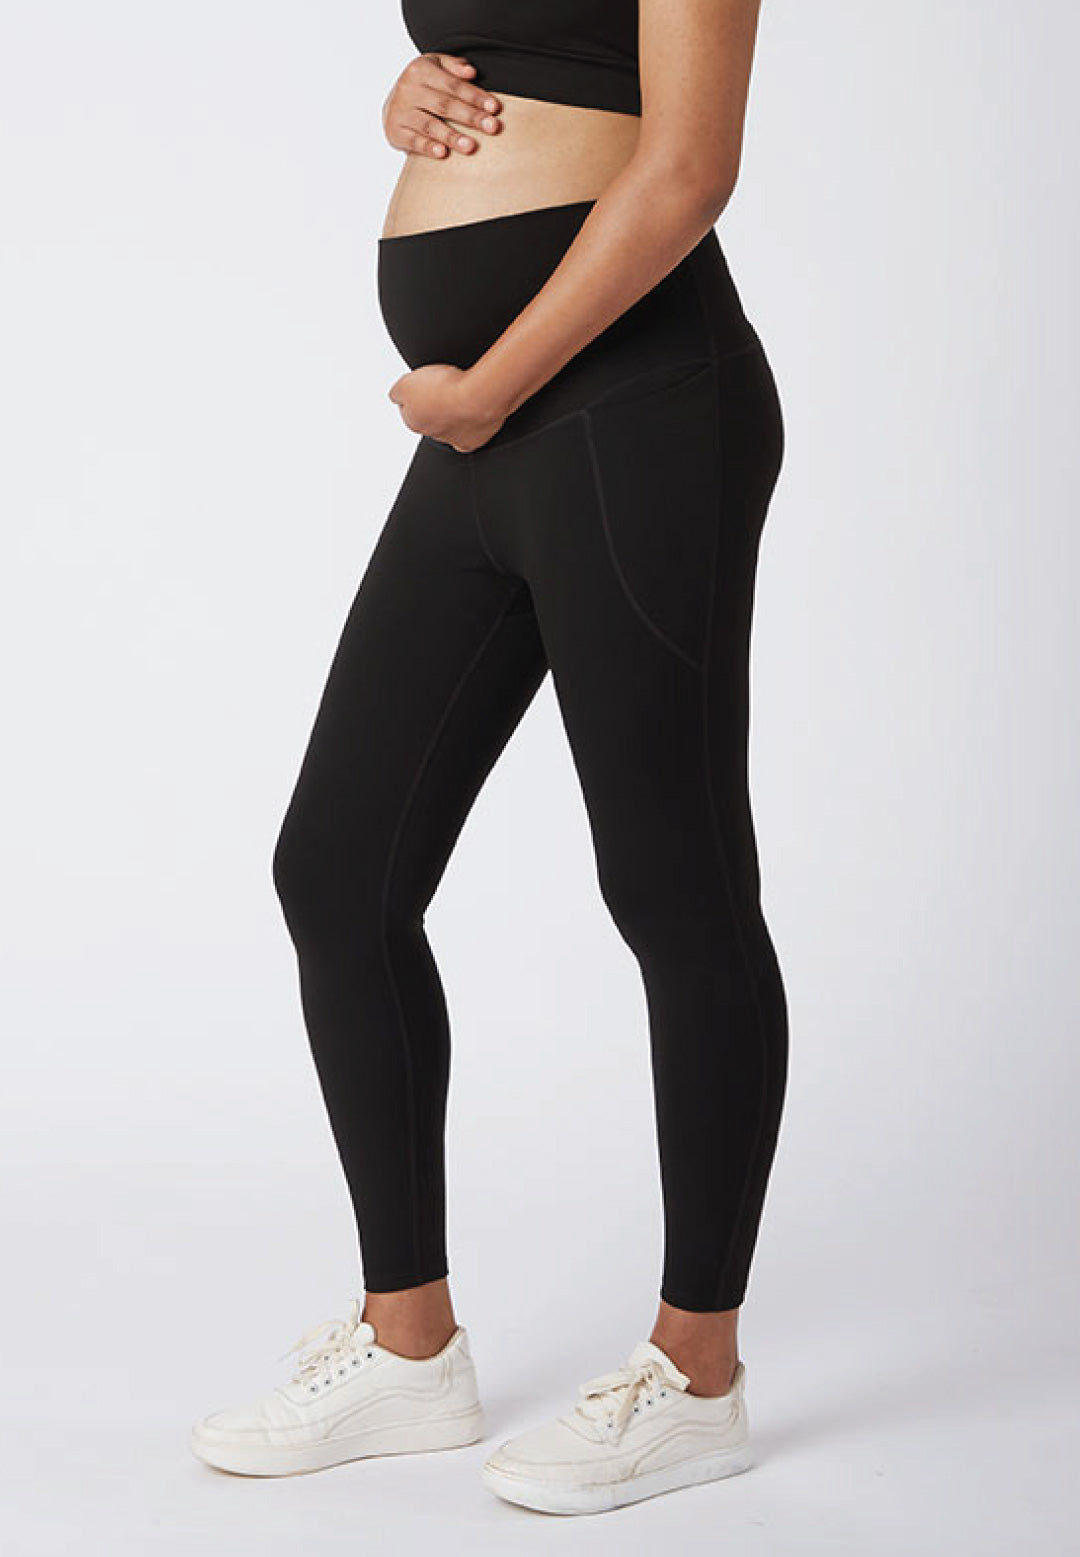 DABOOM Leggings for Women, High Waist and Non See-Through, Ankle